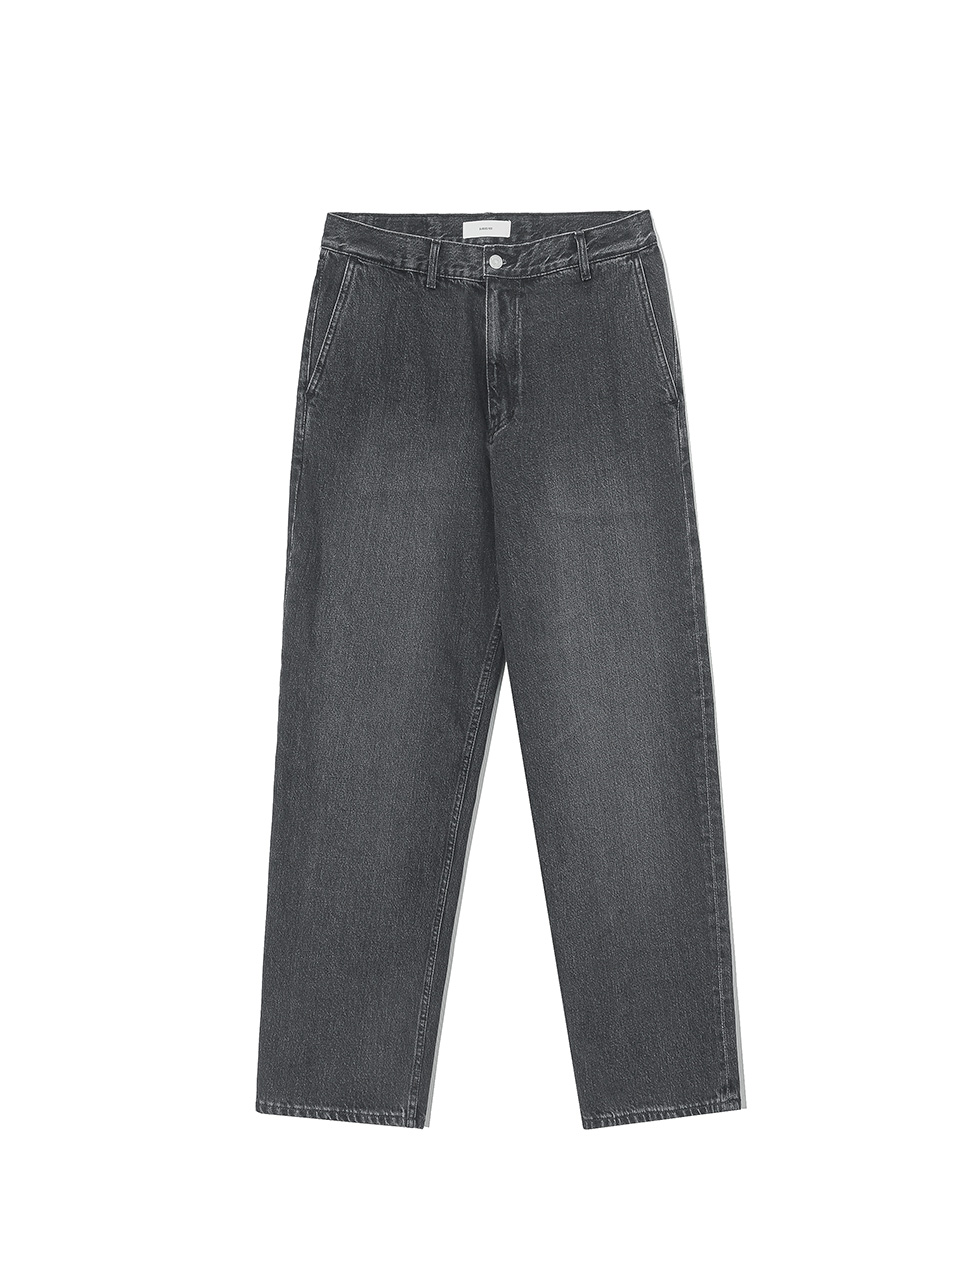 [Ourselves] ORGANIC COTTON RELAXED DENIM PANTS (Bleached black)